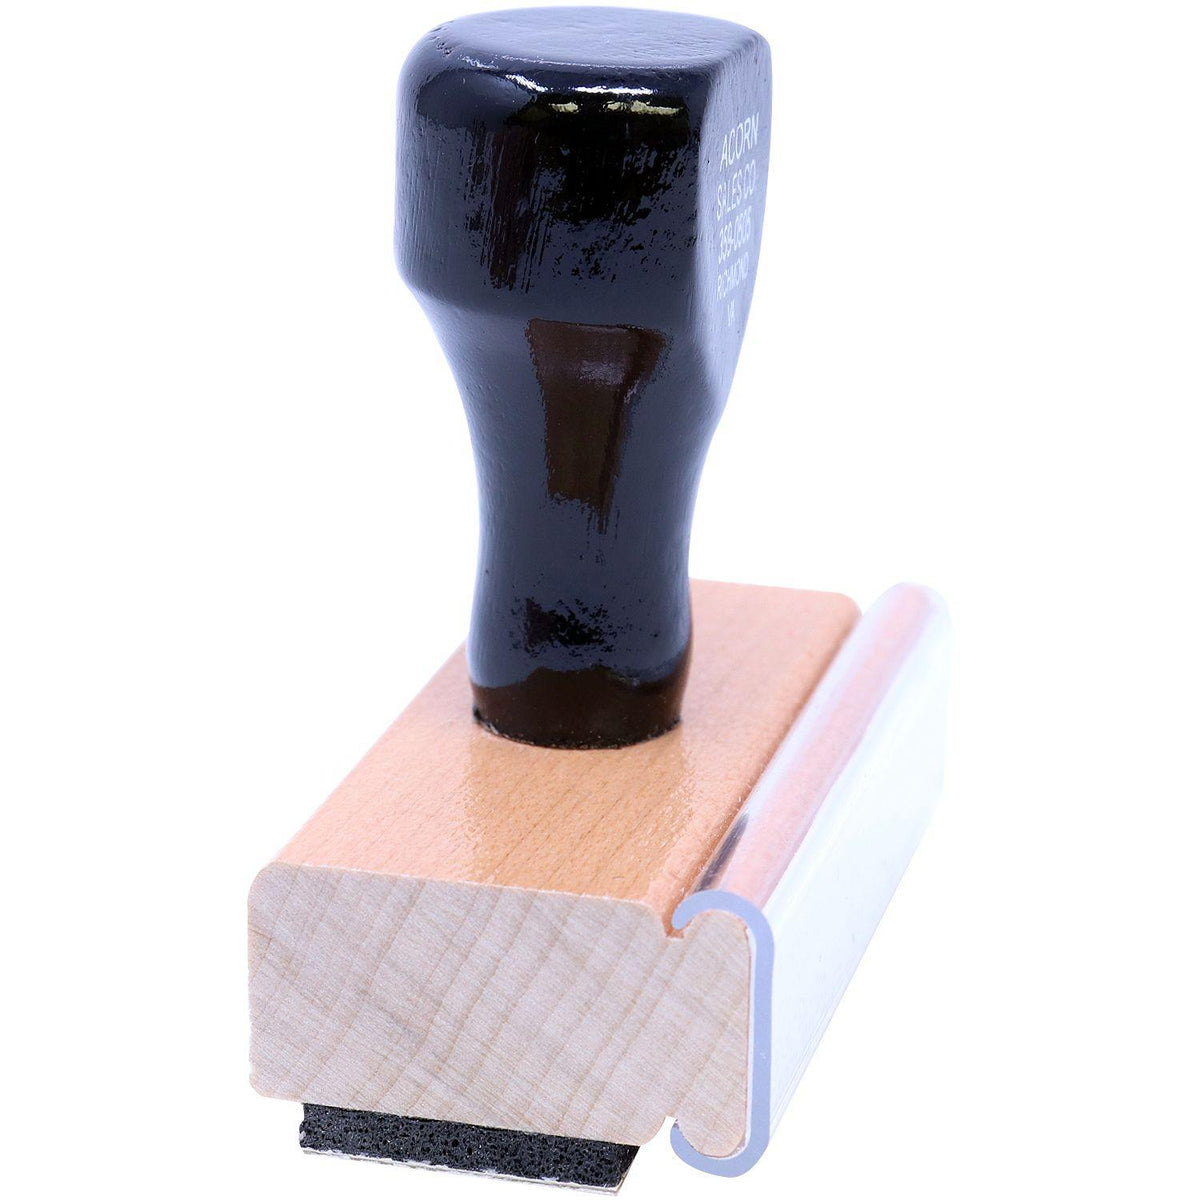 Side View of COD Outline Rubber Stamp at an Angle